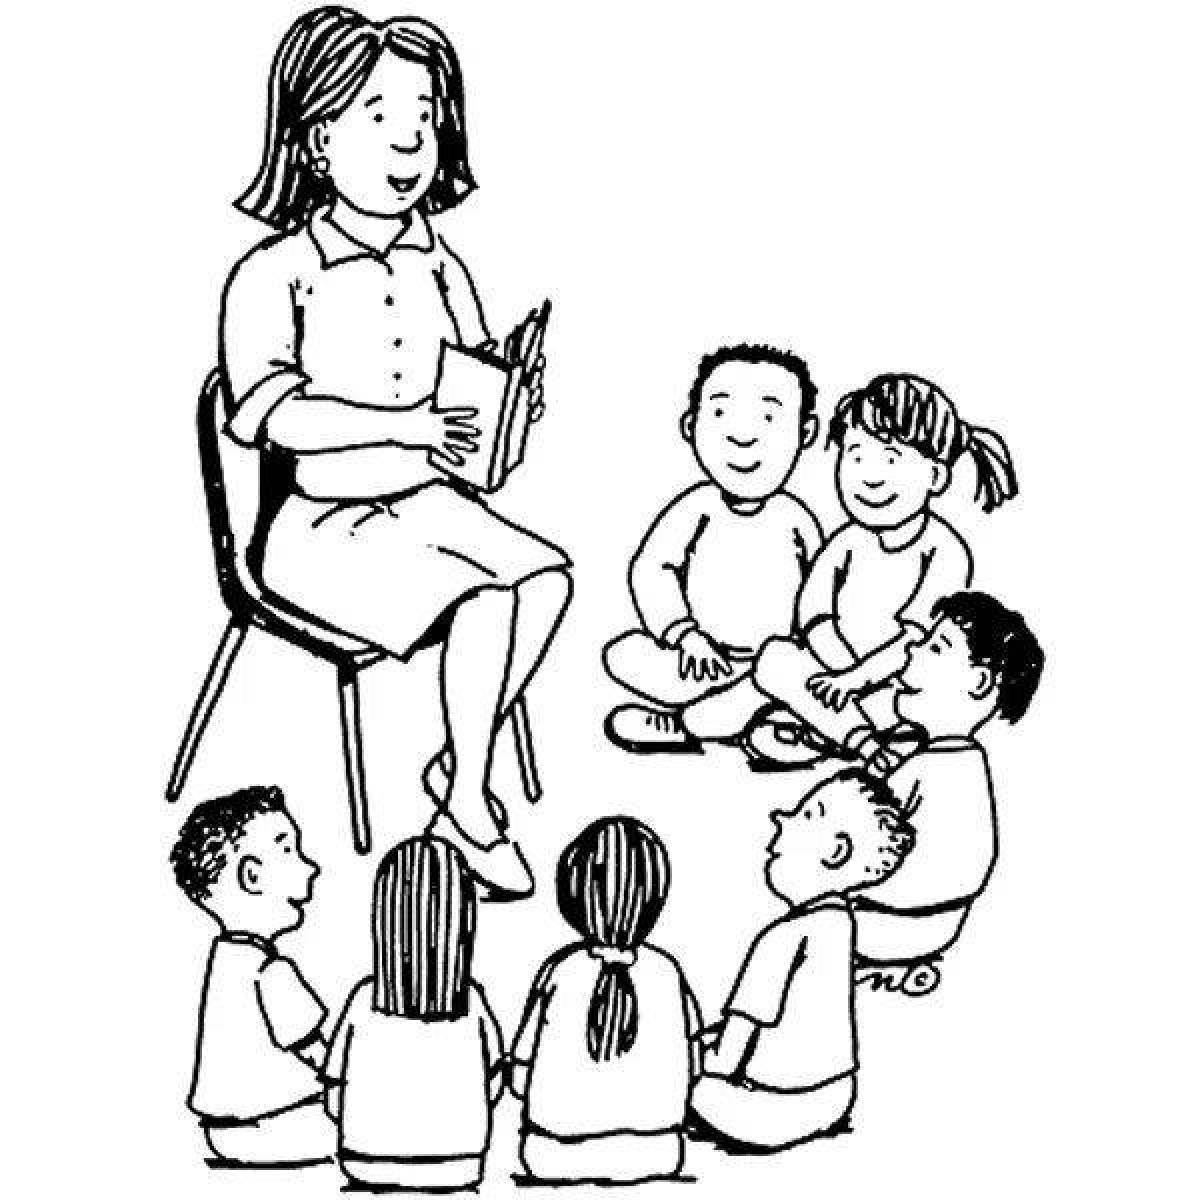 Colorful kindergarten teacher and children coloring page